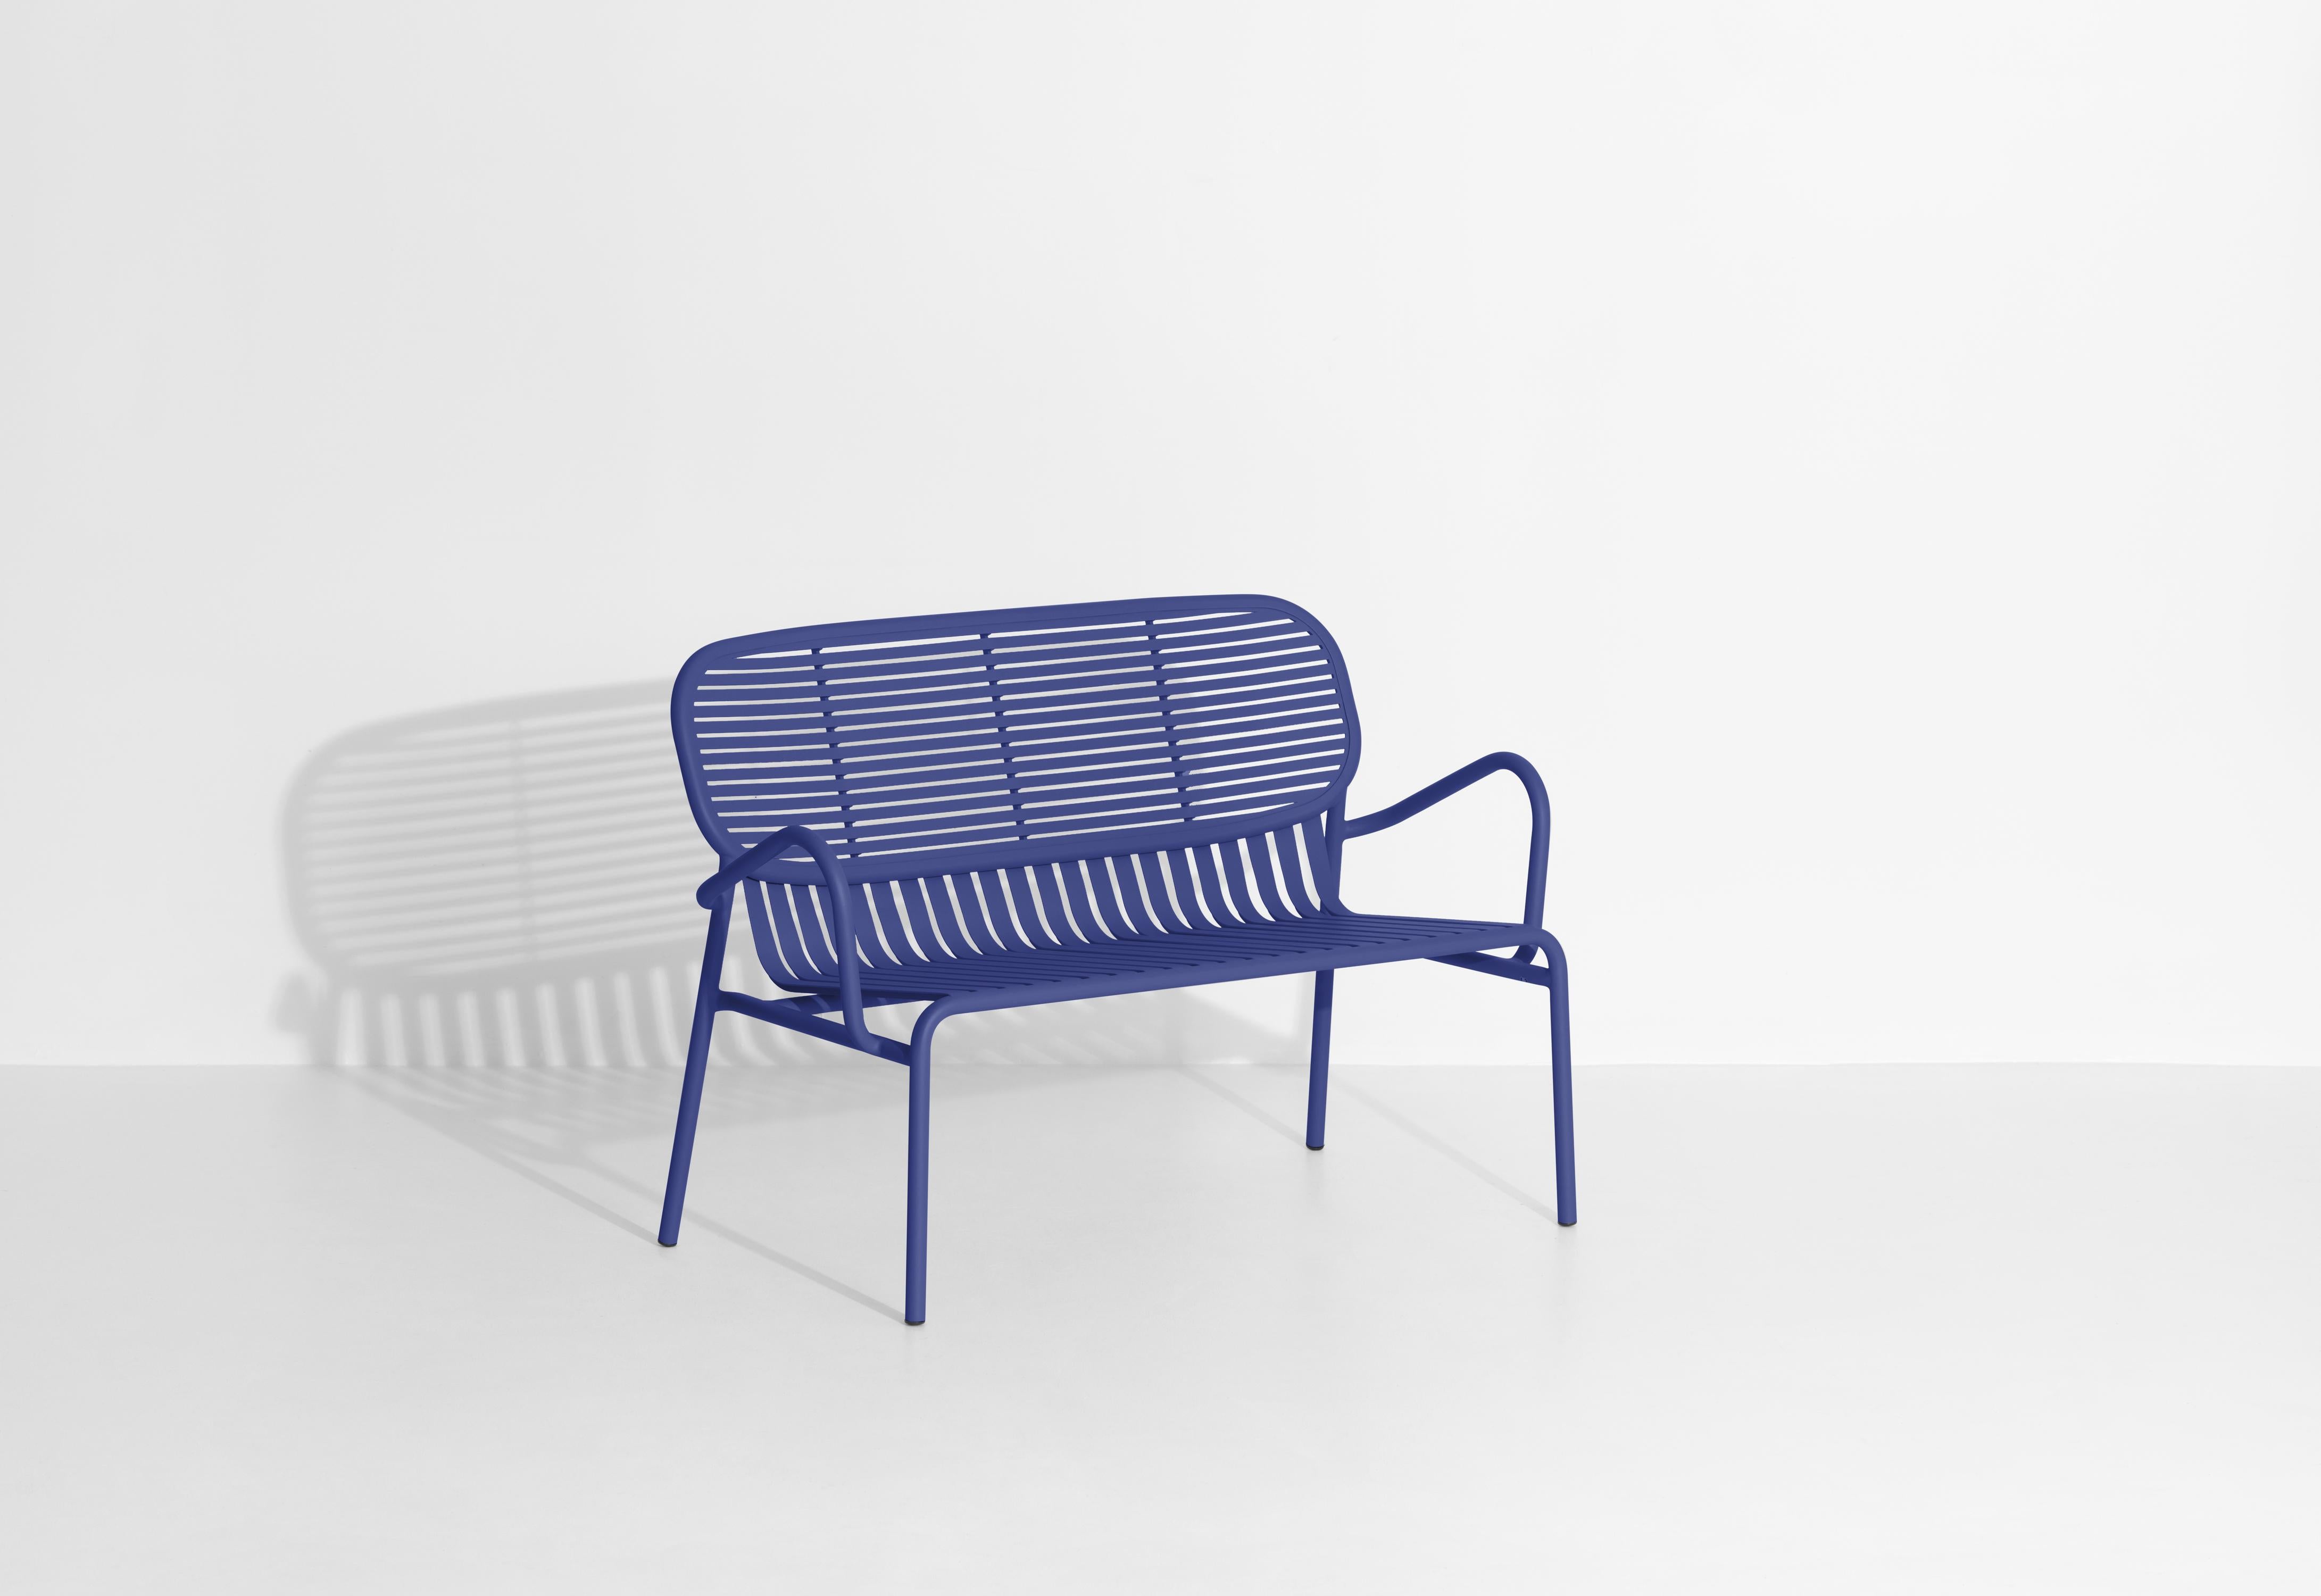 Petite Friture Week-End Sofa in Blue Aluminium by Studio BrichetZiegler In New Condition For Sale In Brooklyn, NY